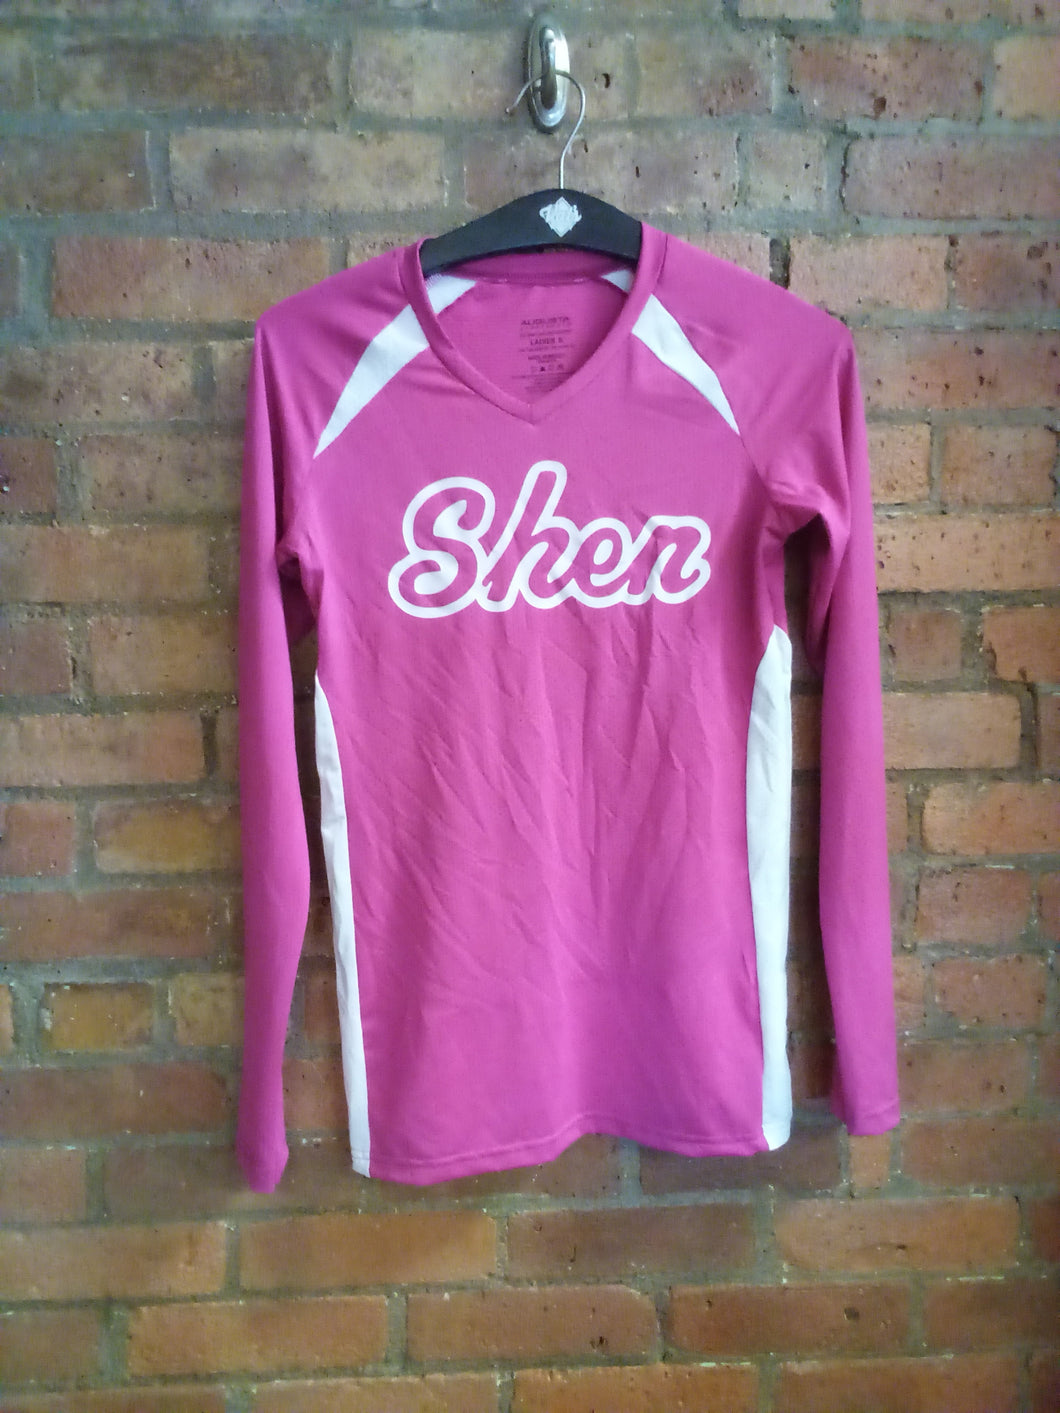 CLEARANCE - Pink Colorblock Shen Long Sleeved Moisture Management Shirt Size Small